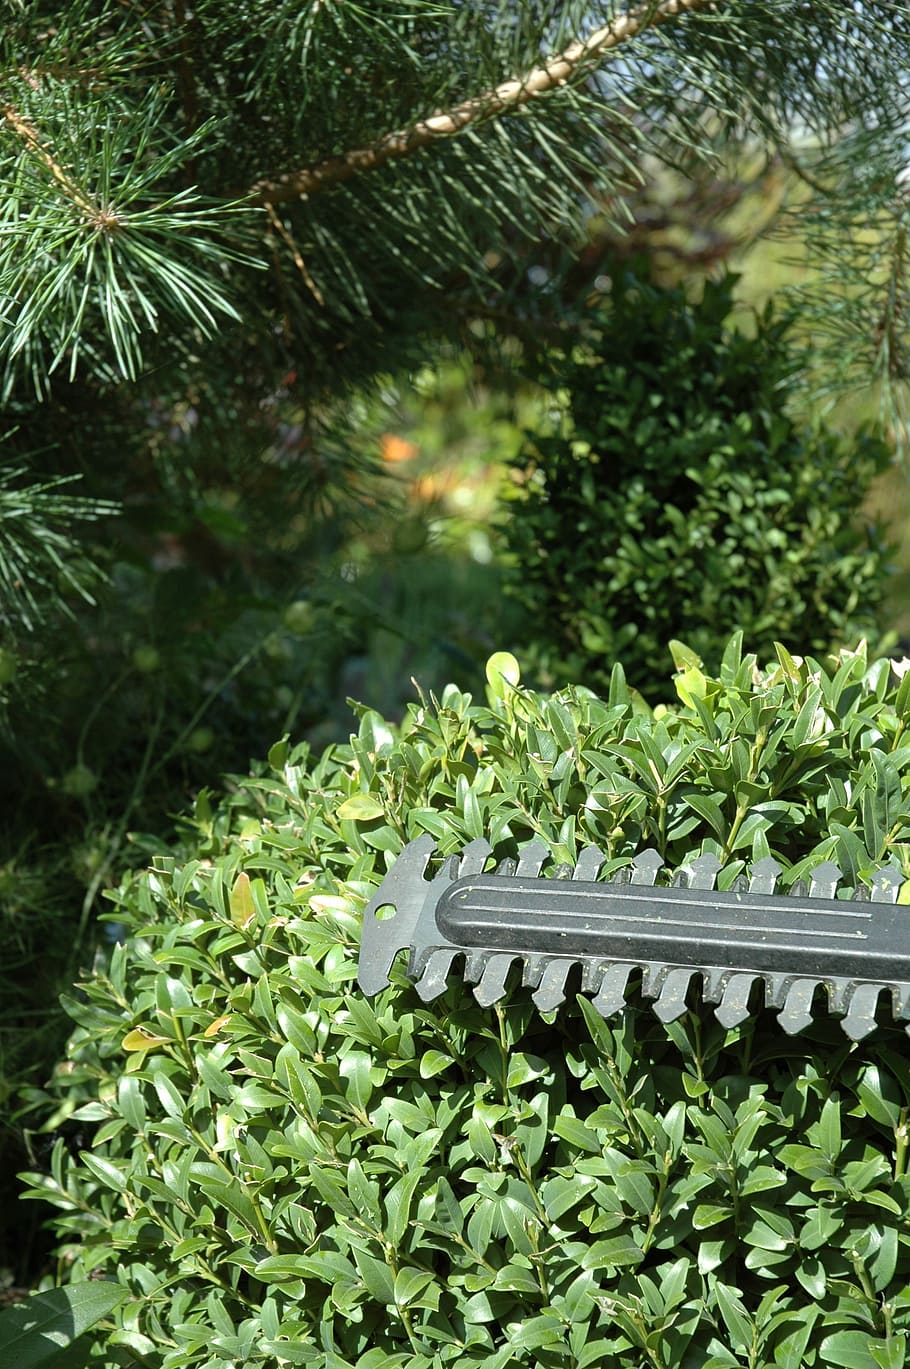 Boxwood, Shrub, Shear, Gardening, hedge trimmer, plant, growth, nature, outdoors, day